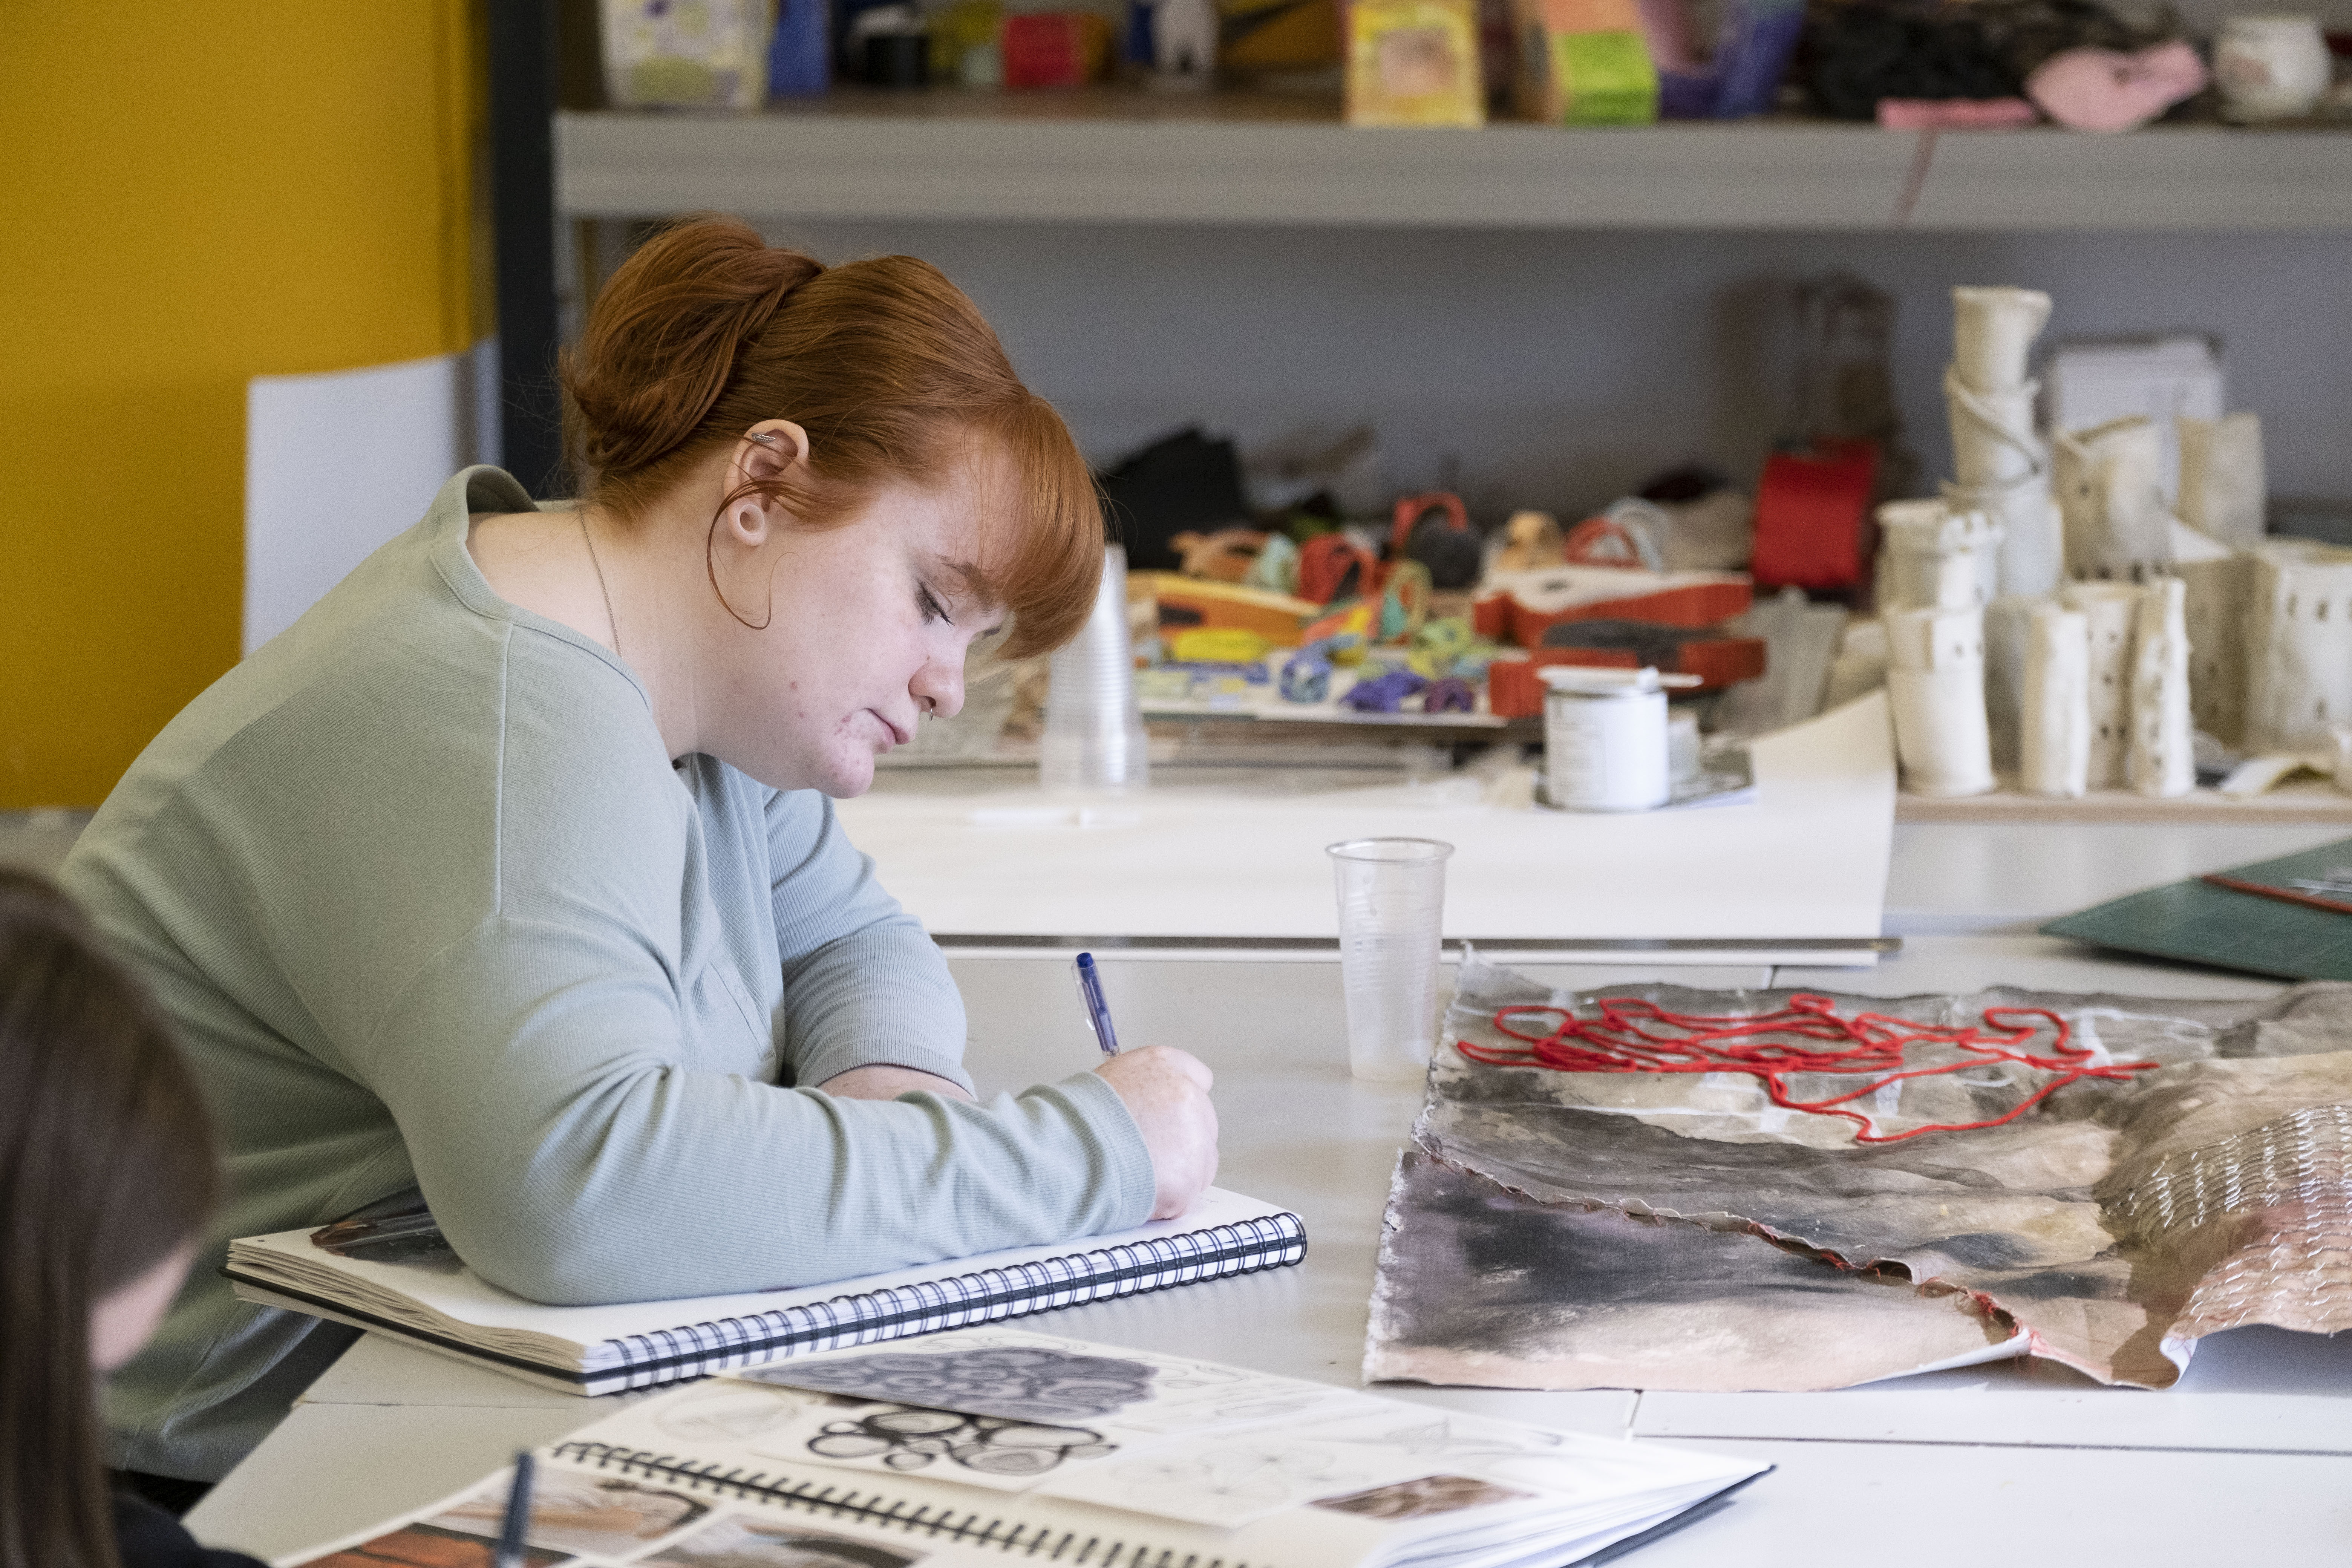 Glasgow Clyde College Art student working on sketches